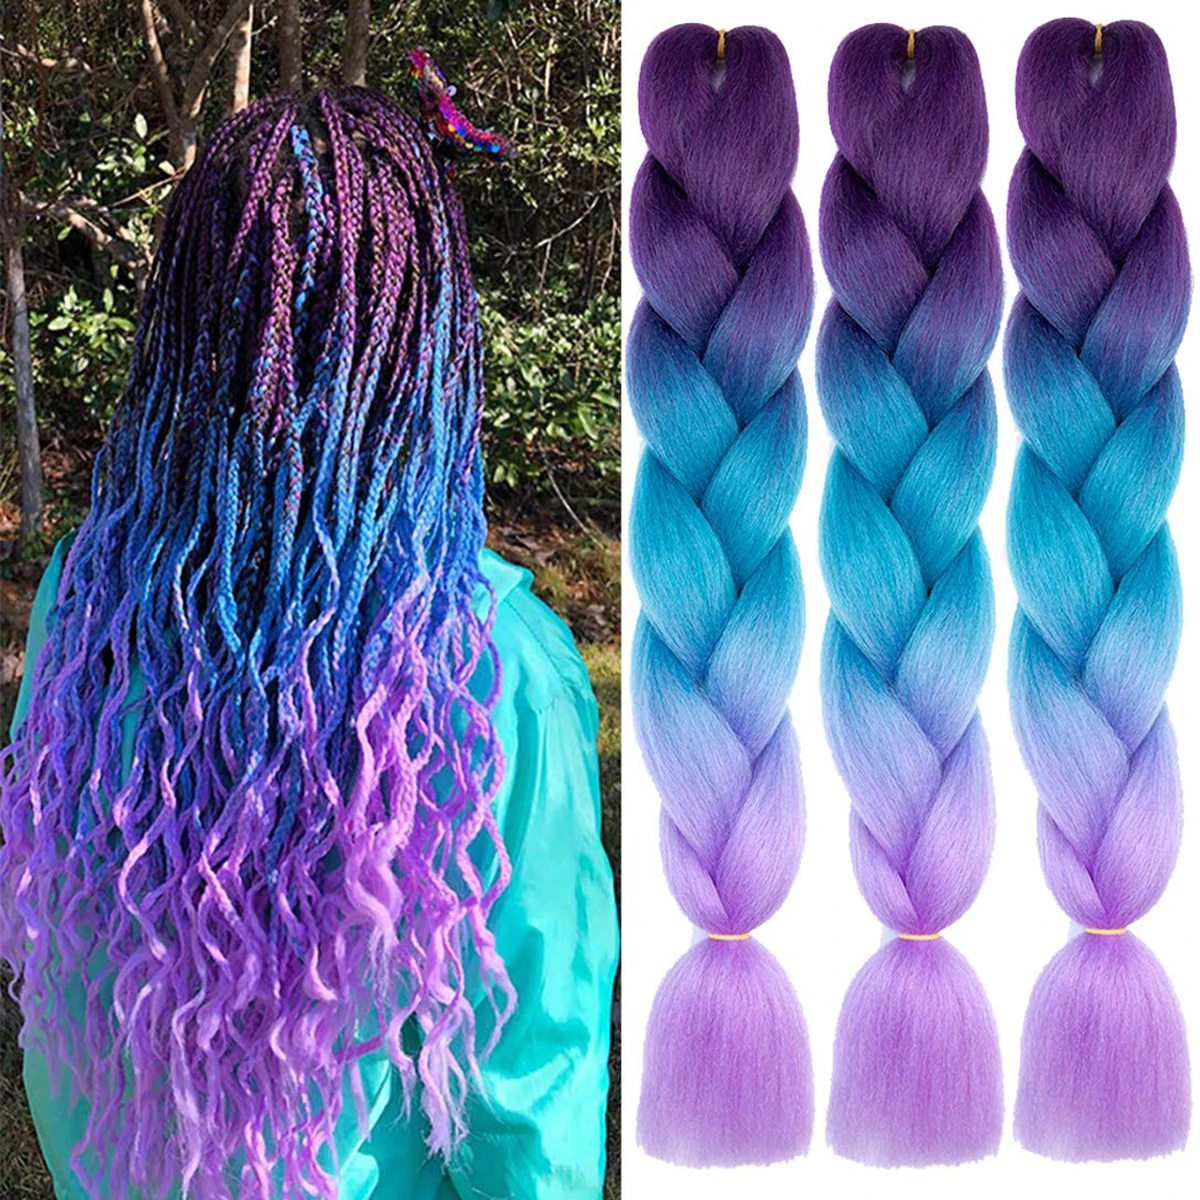 Ombre Braiding Hair 24 Inch 1PCS/3pcs/Pack High-temperature Synthetic Crochet Twist Rainbow Hair Gray Black Trend Way for Women